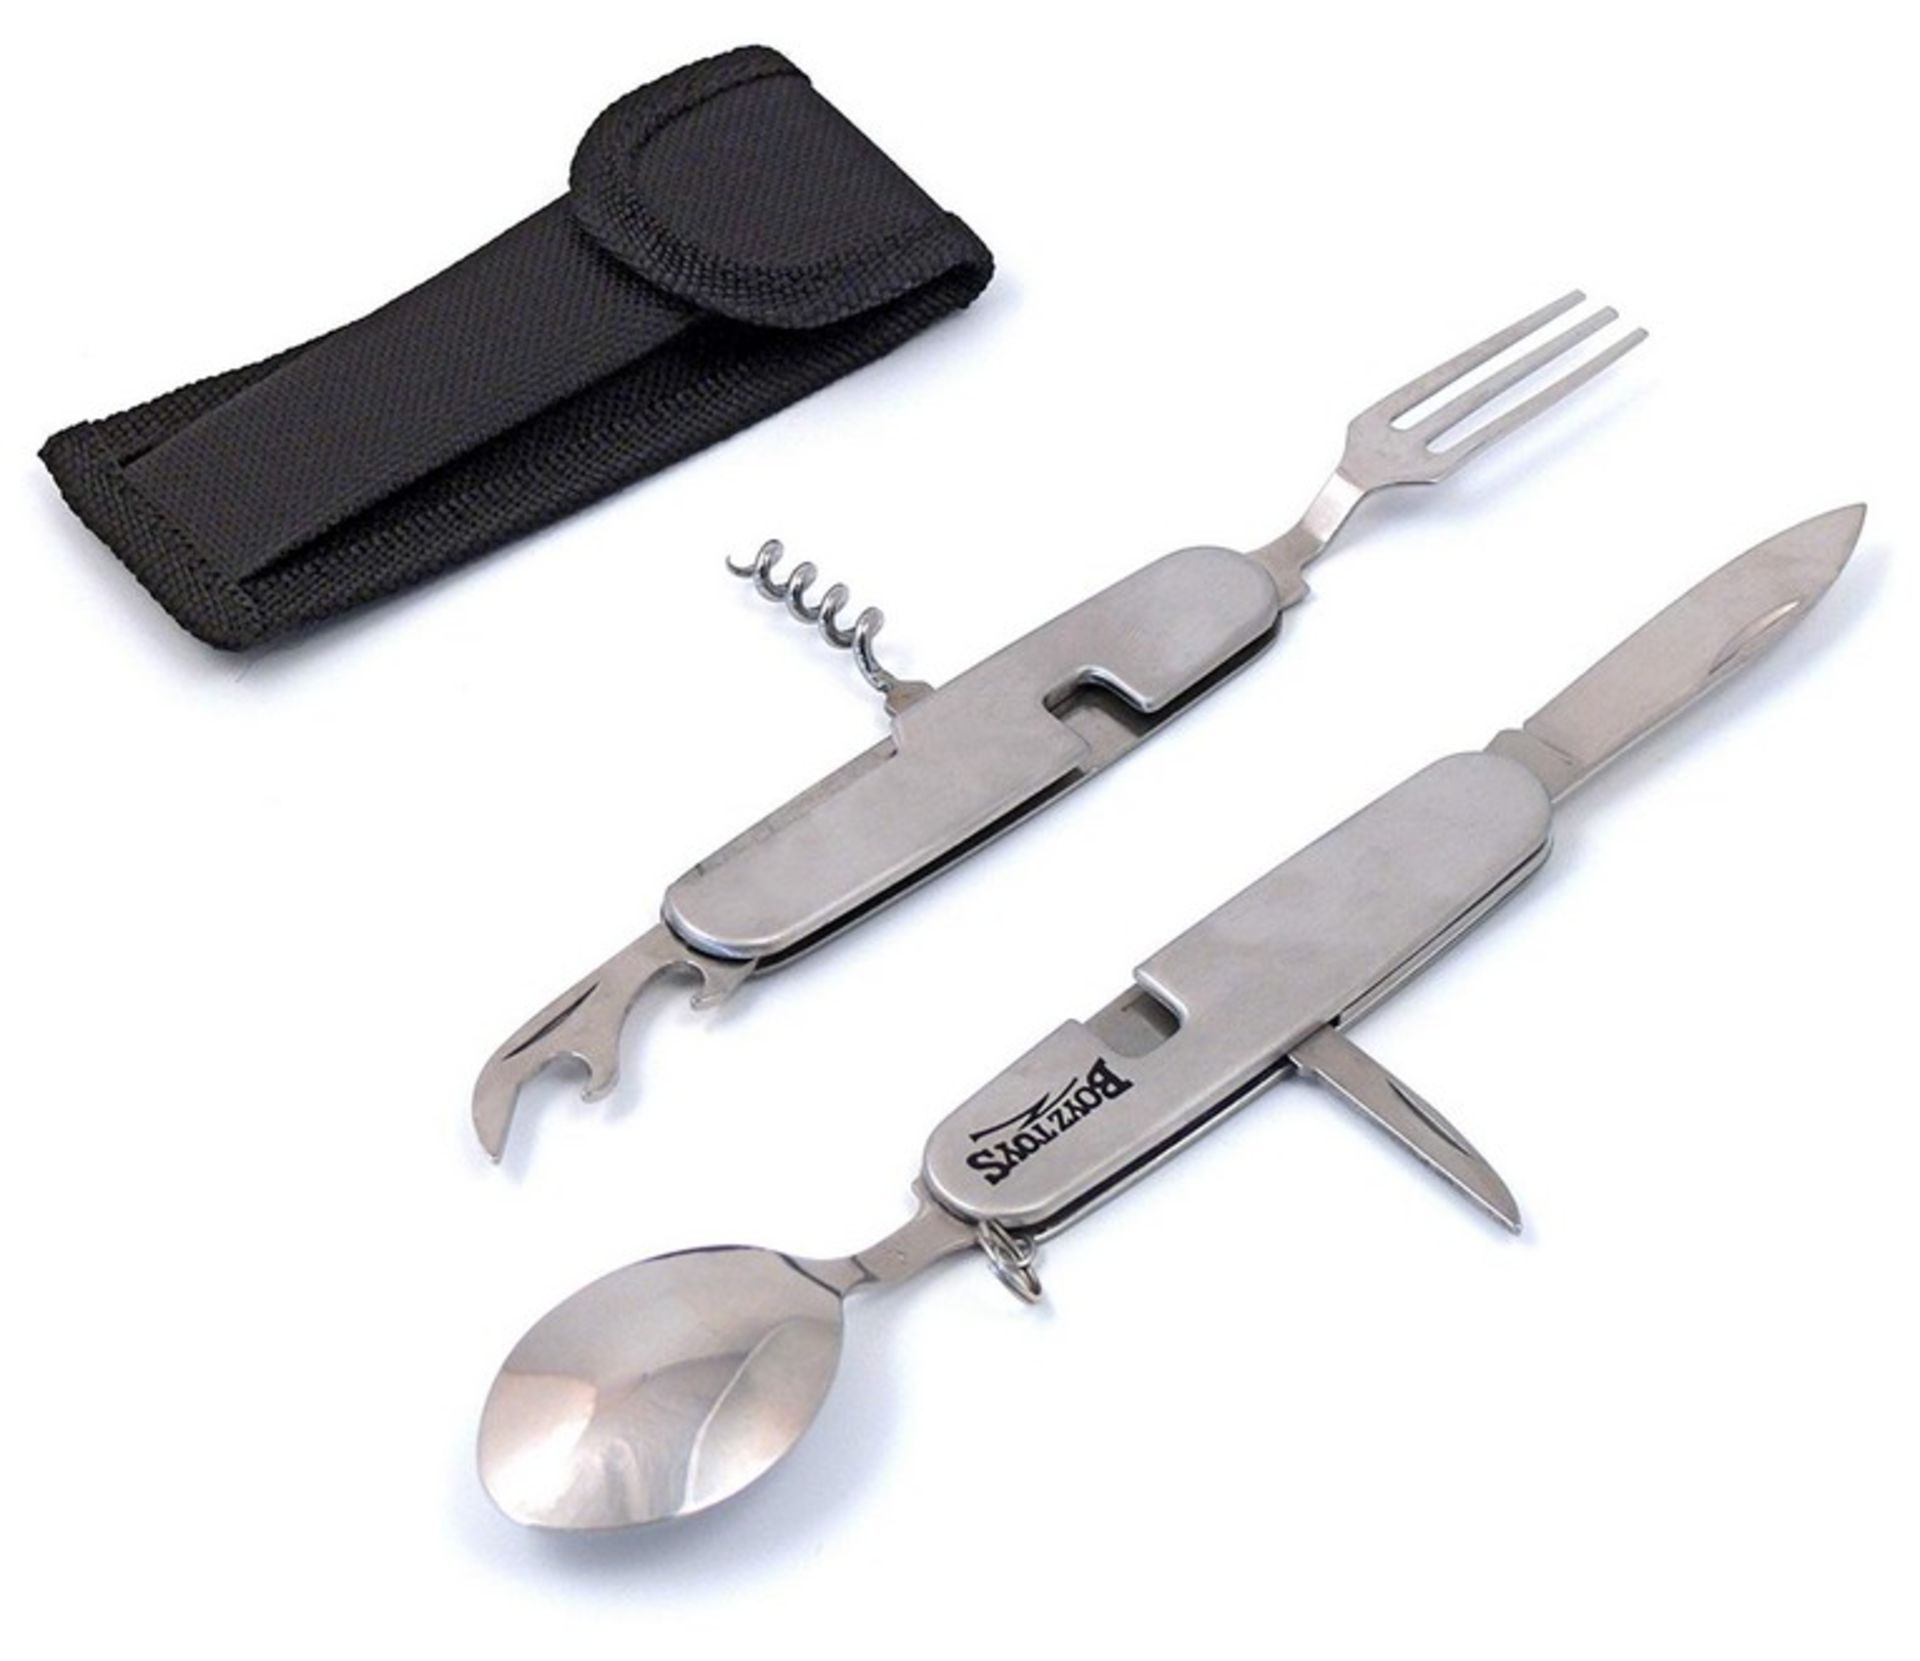 3 x 8 functions Stainless steel cutlery sets - Image 3 of 3